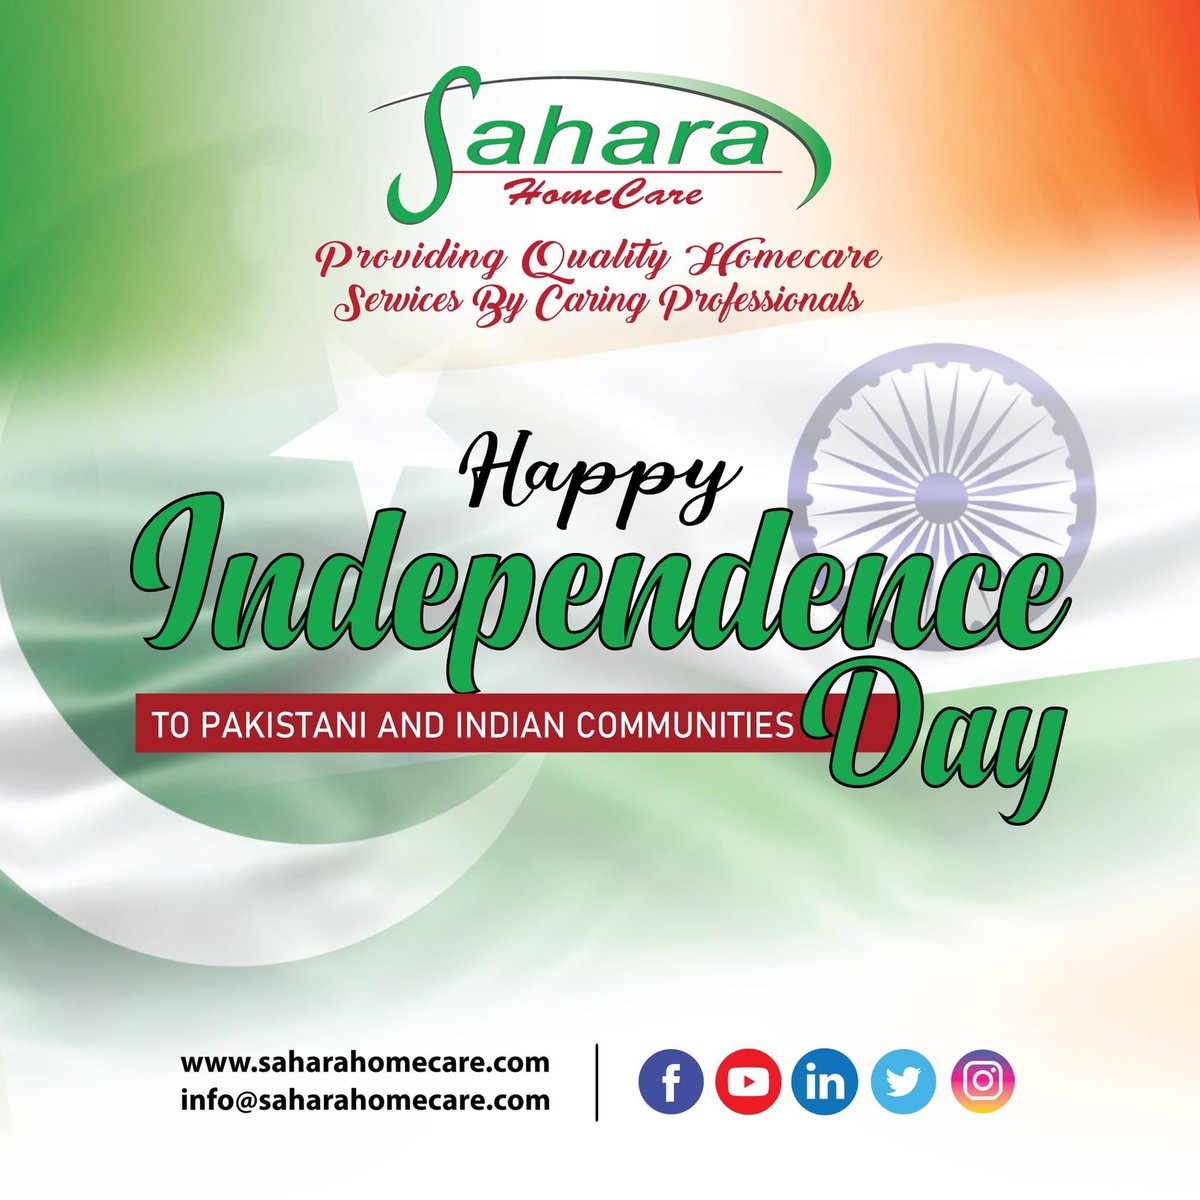 Happy Independence Day to all those who are celebrating! ❤️ #happyindependenceday #indianindependenceday #pakistaniindependenceday #saharahomecare #homecare #homecareprovider #seniorcare #seniorcareprovider #elderlycare #homecareaide #hca